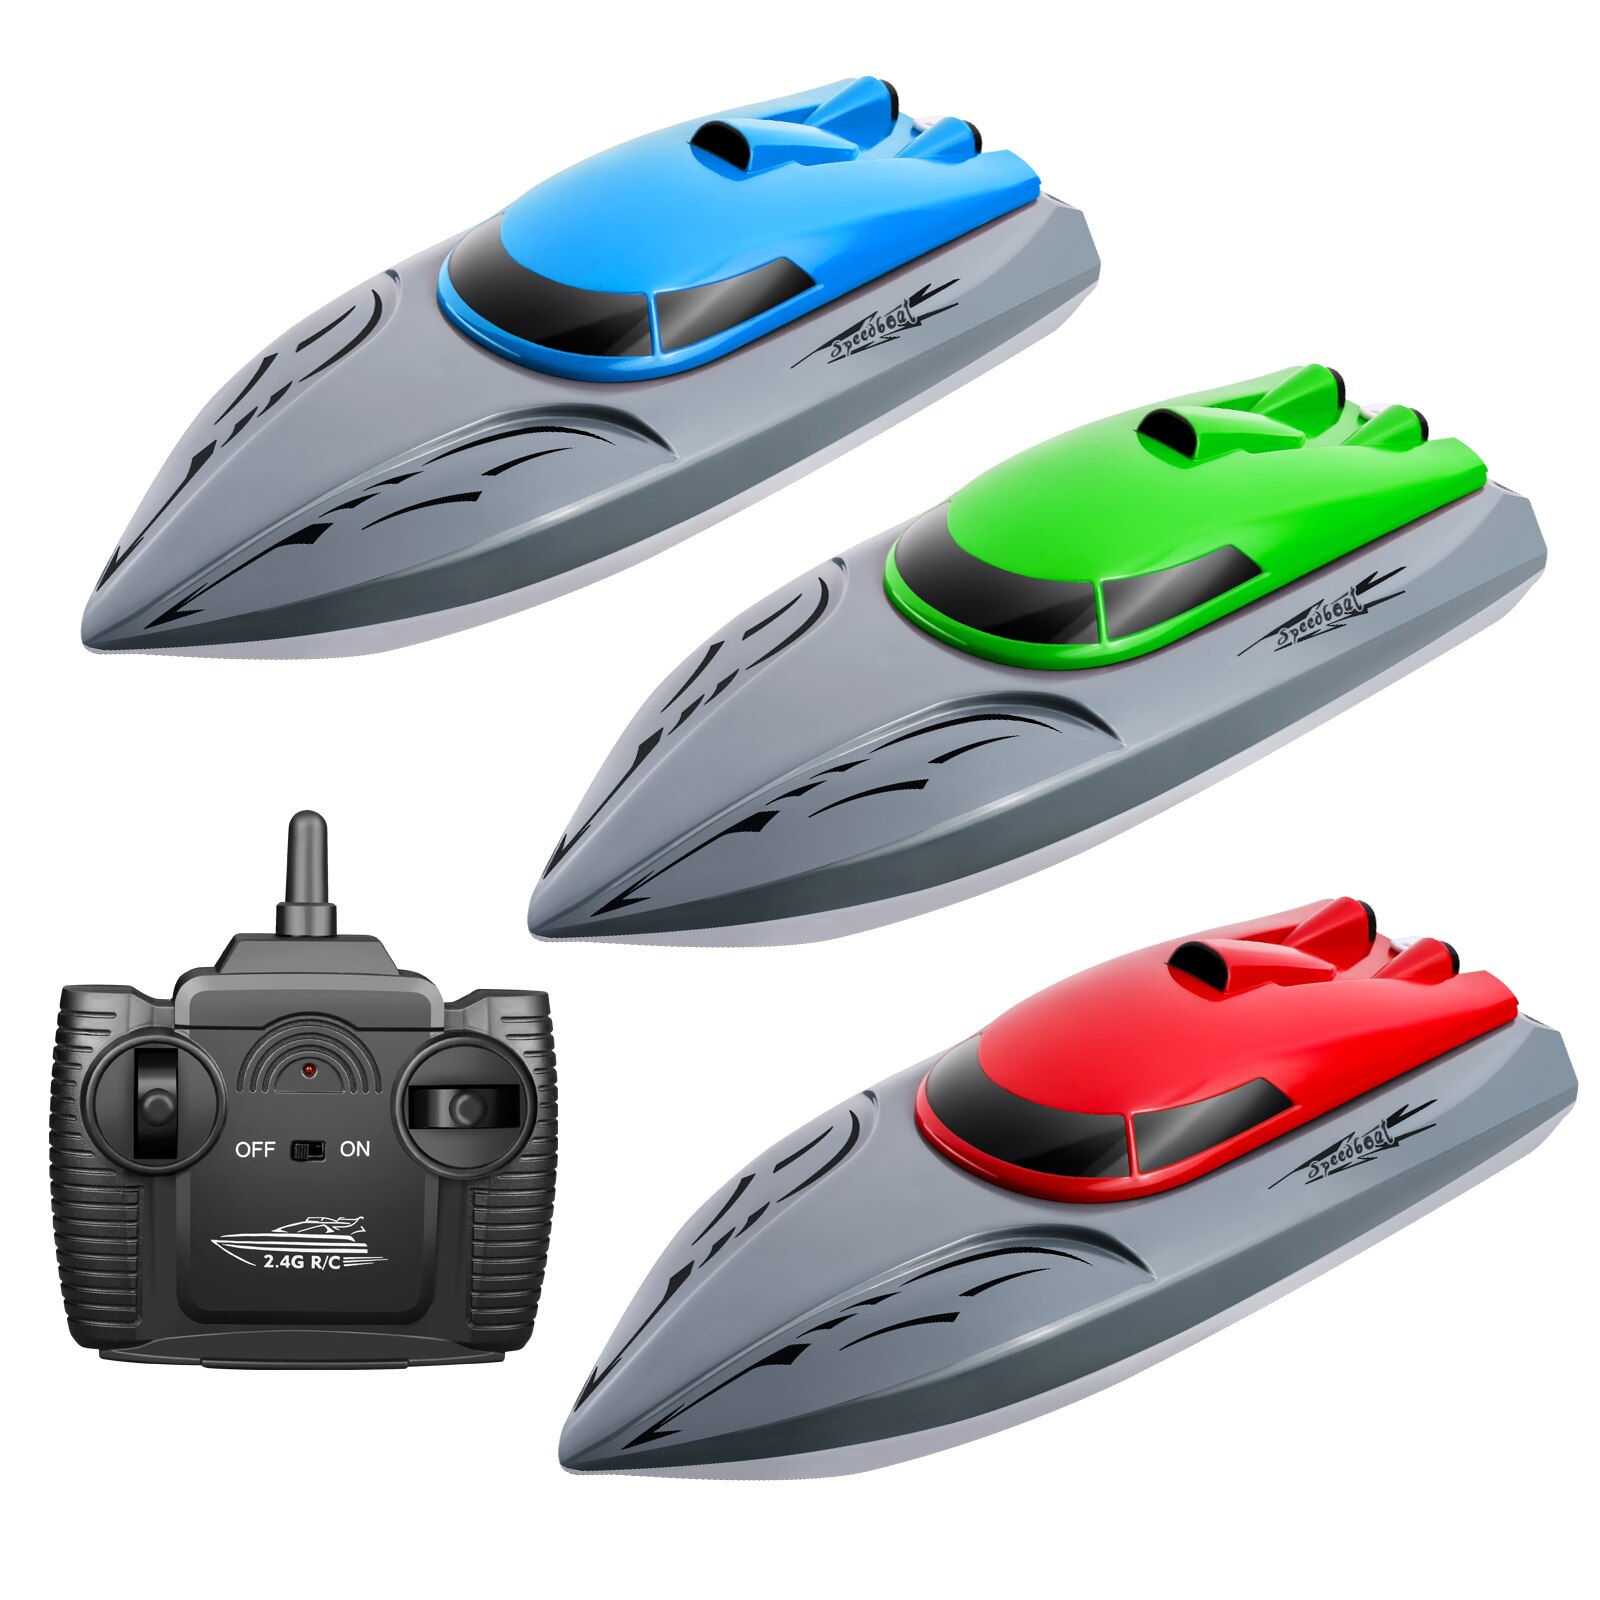 Rc Boat 2.4G High Speed 20km/h Remote Control Speed Boat Rechargeable Waterproof Anti-collision Protection Toys for Children